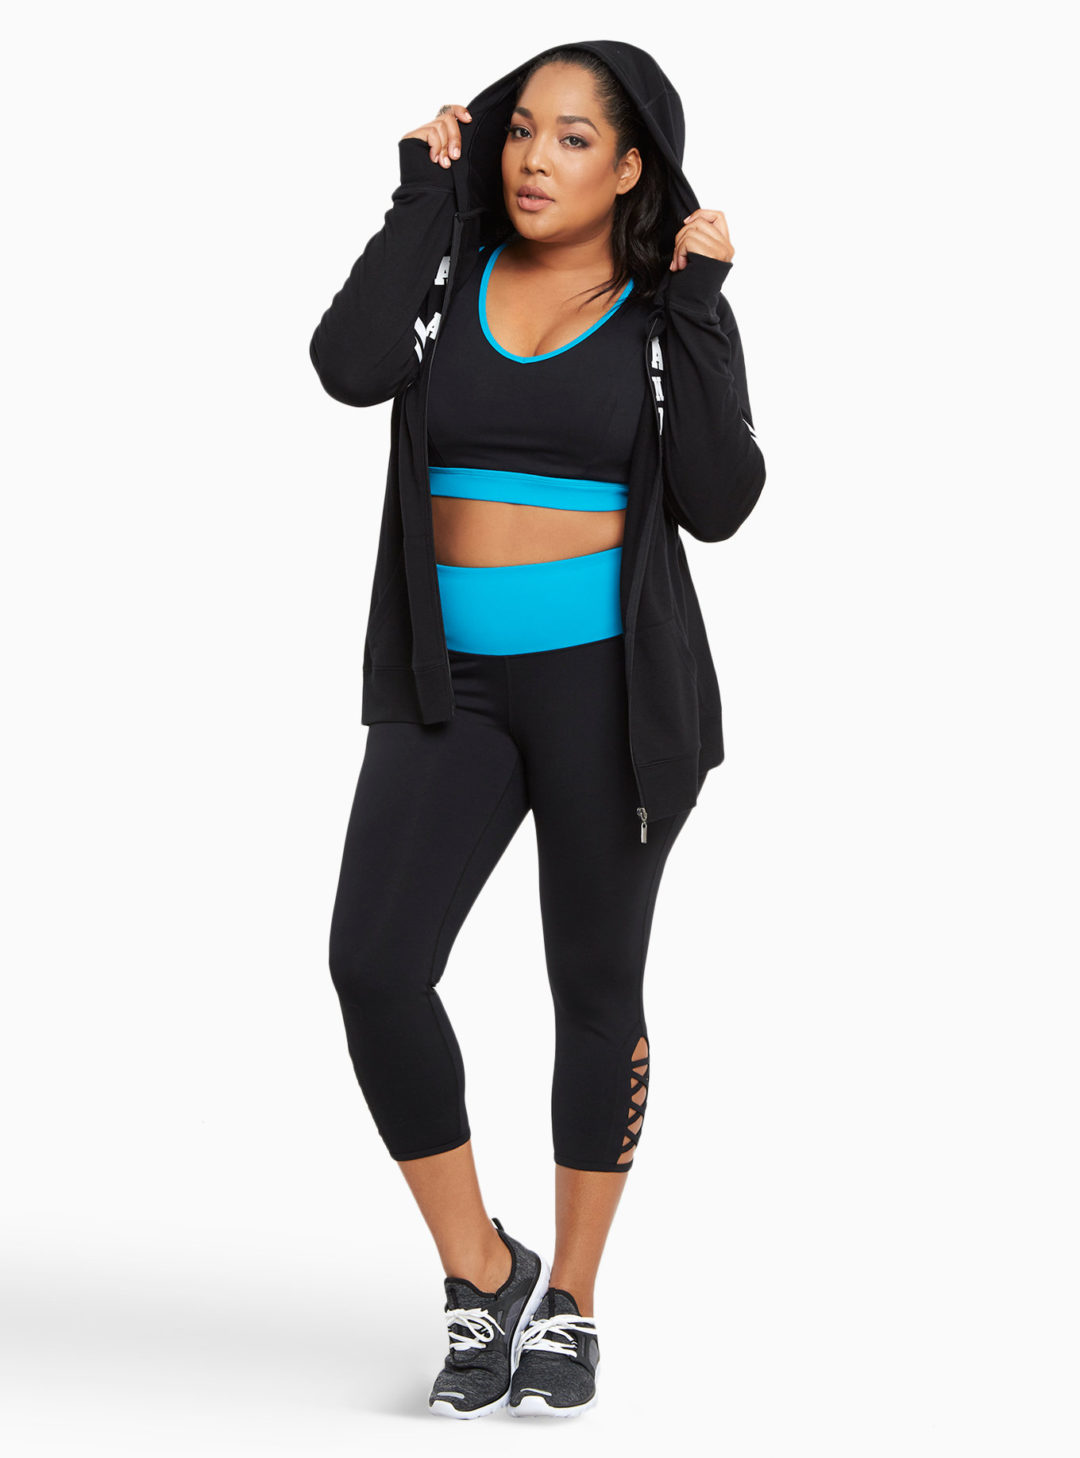 Styled by ReahTest Drive- Torrid Plus Size Activewear | Styled by Reah